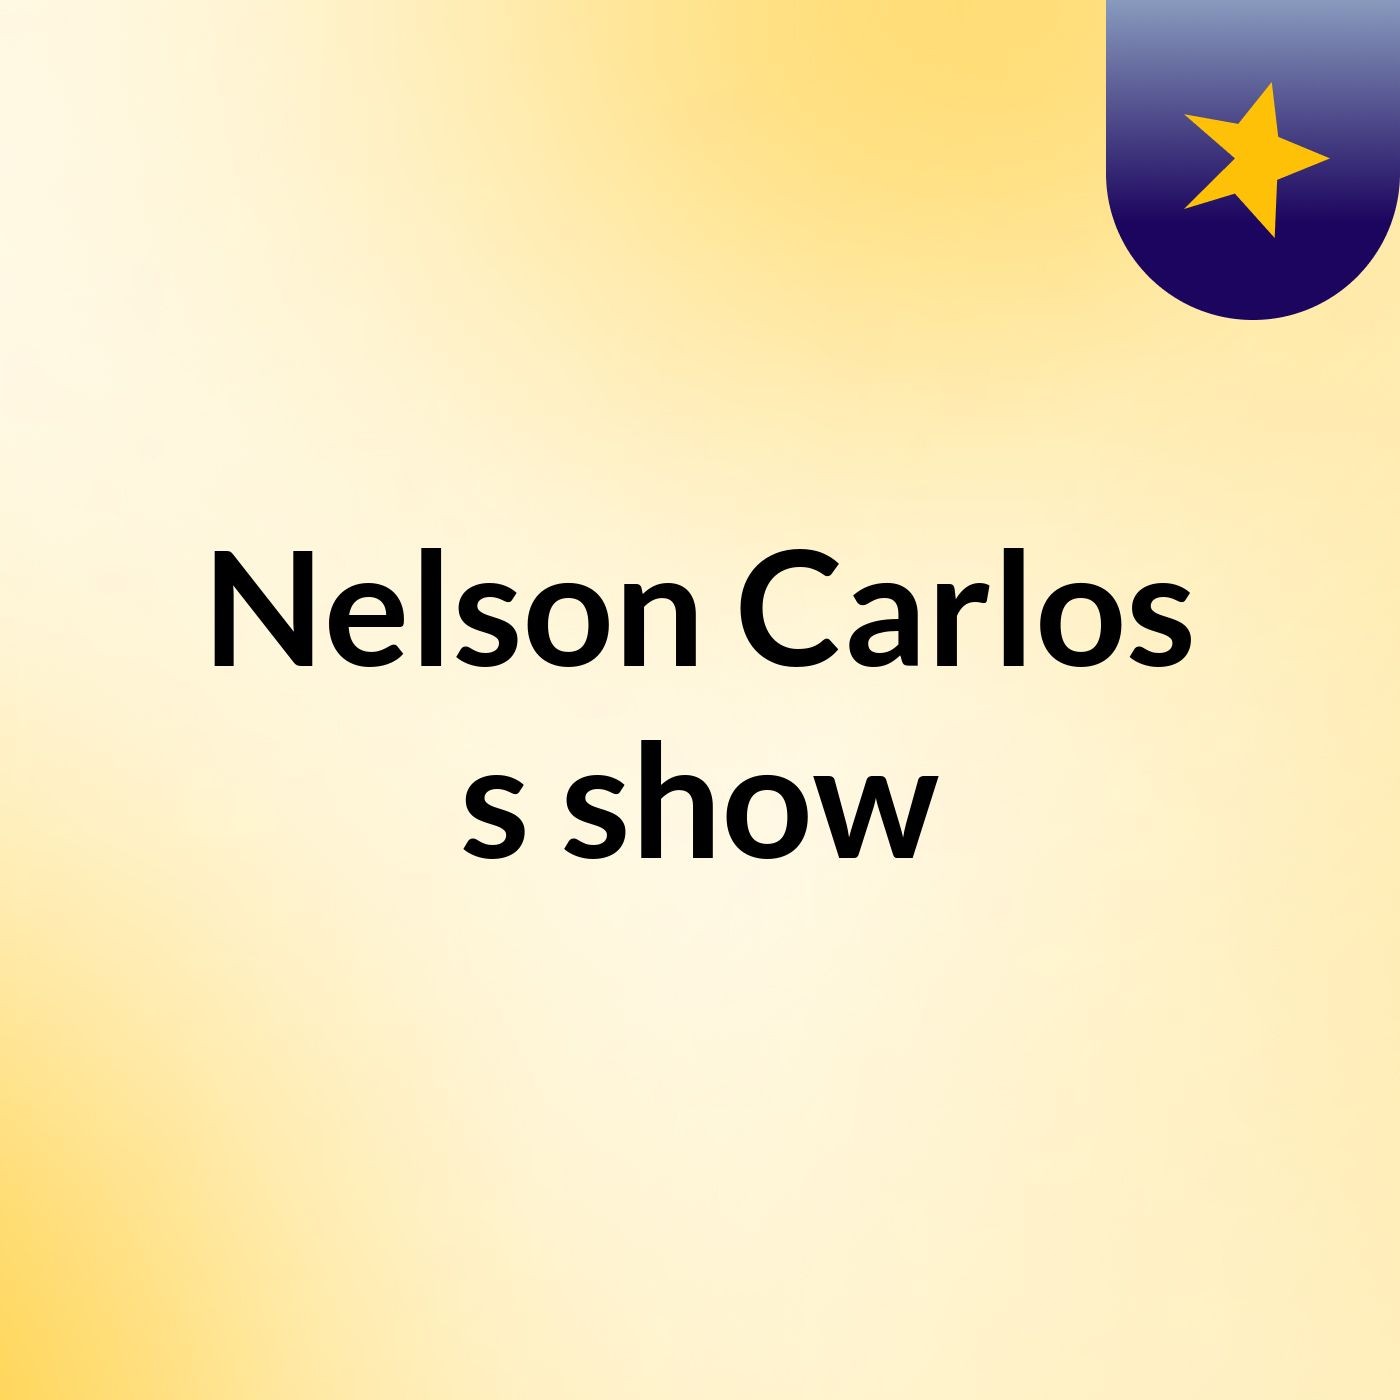 Nelson Carlos's show